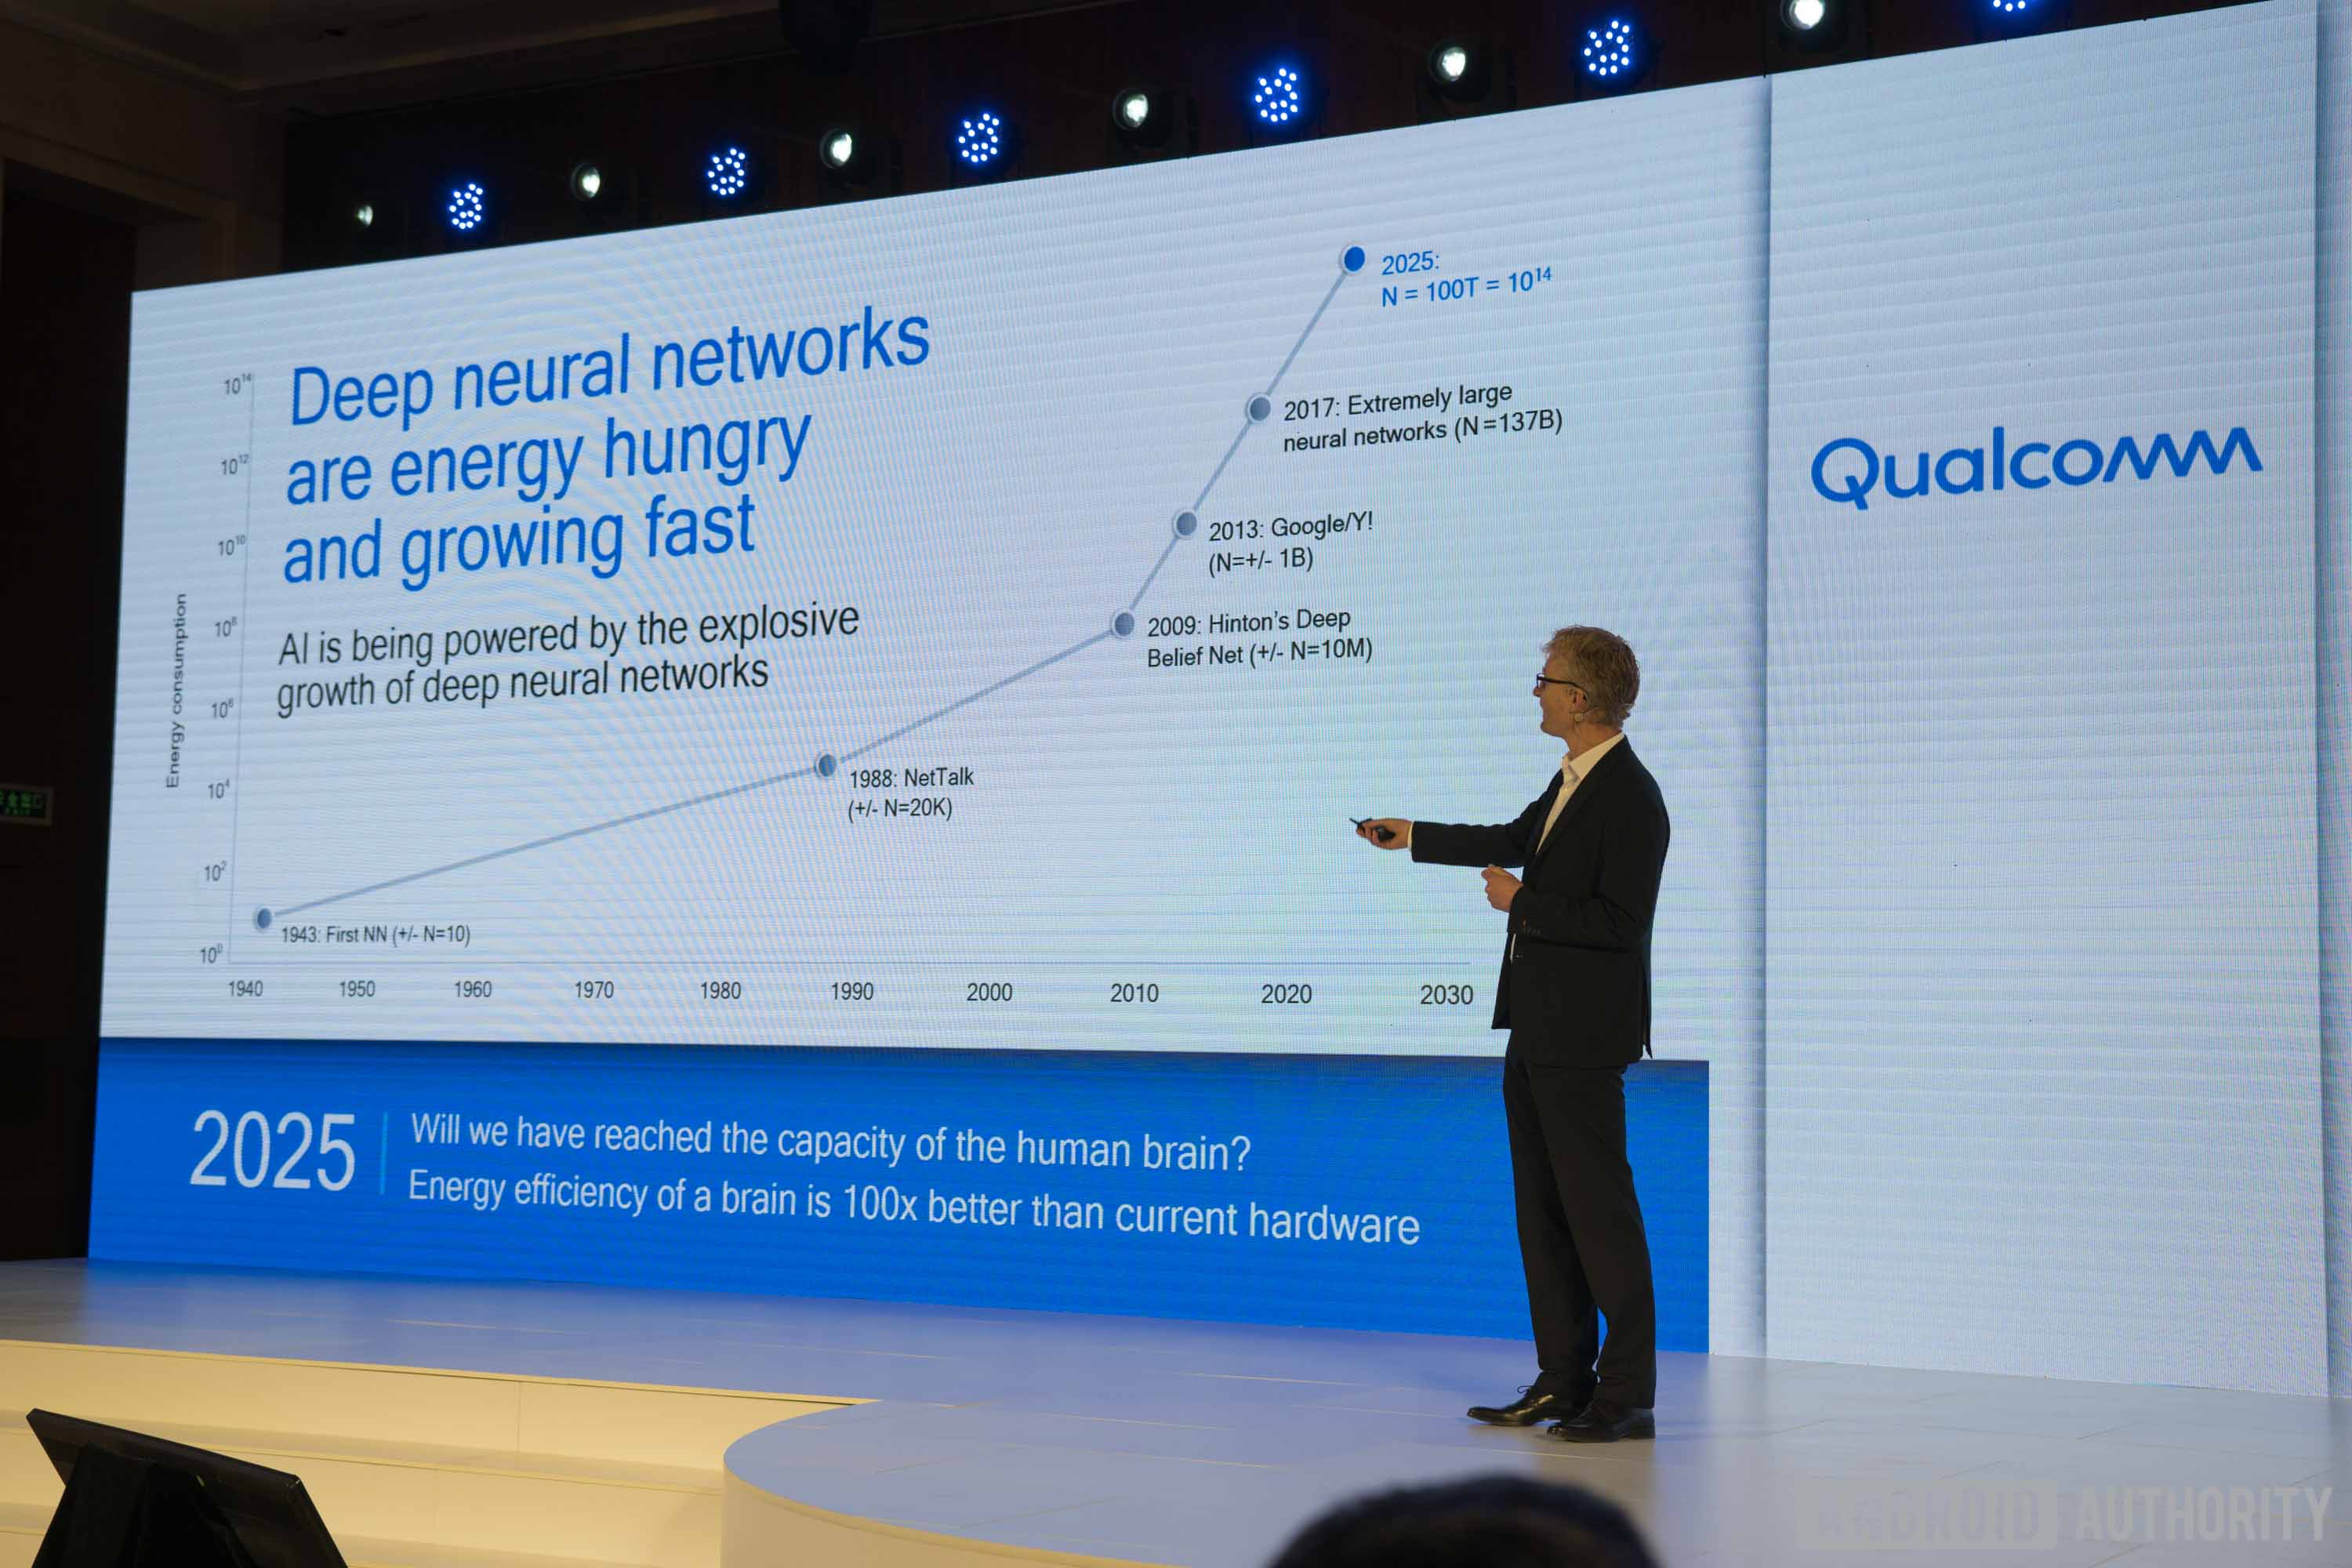 Qualcomm VP of Technology Max Welling shows just how quickly deep neural networks are demanding more energy